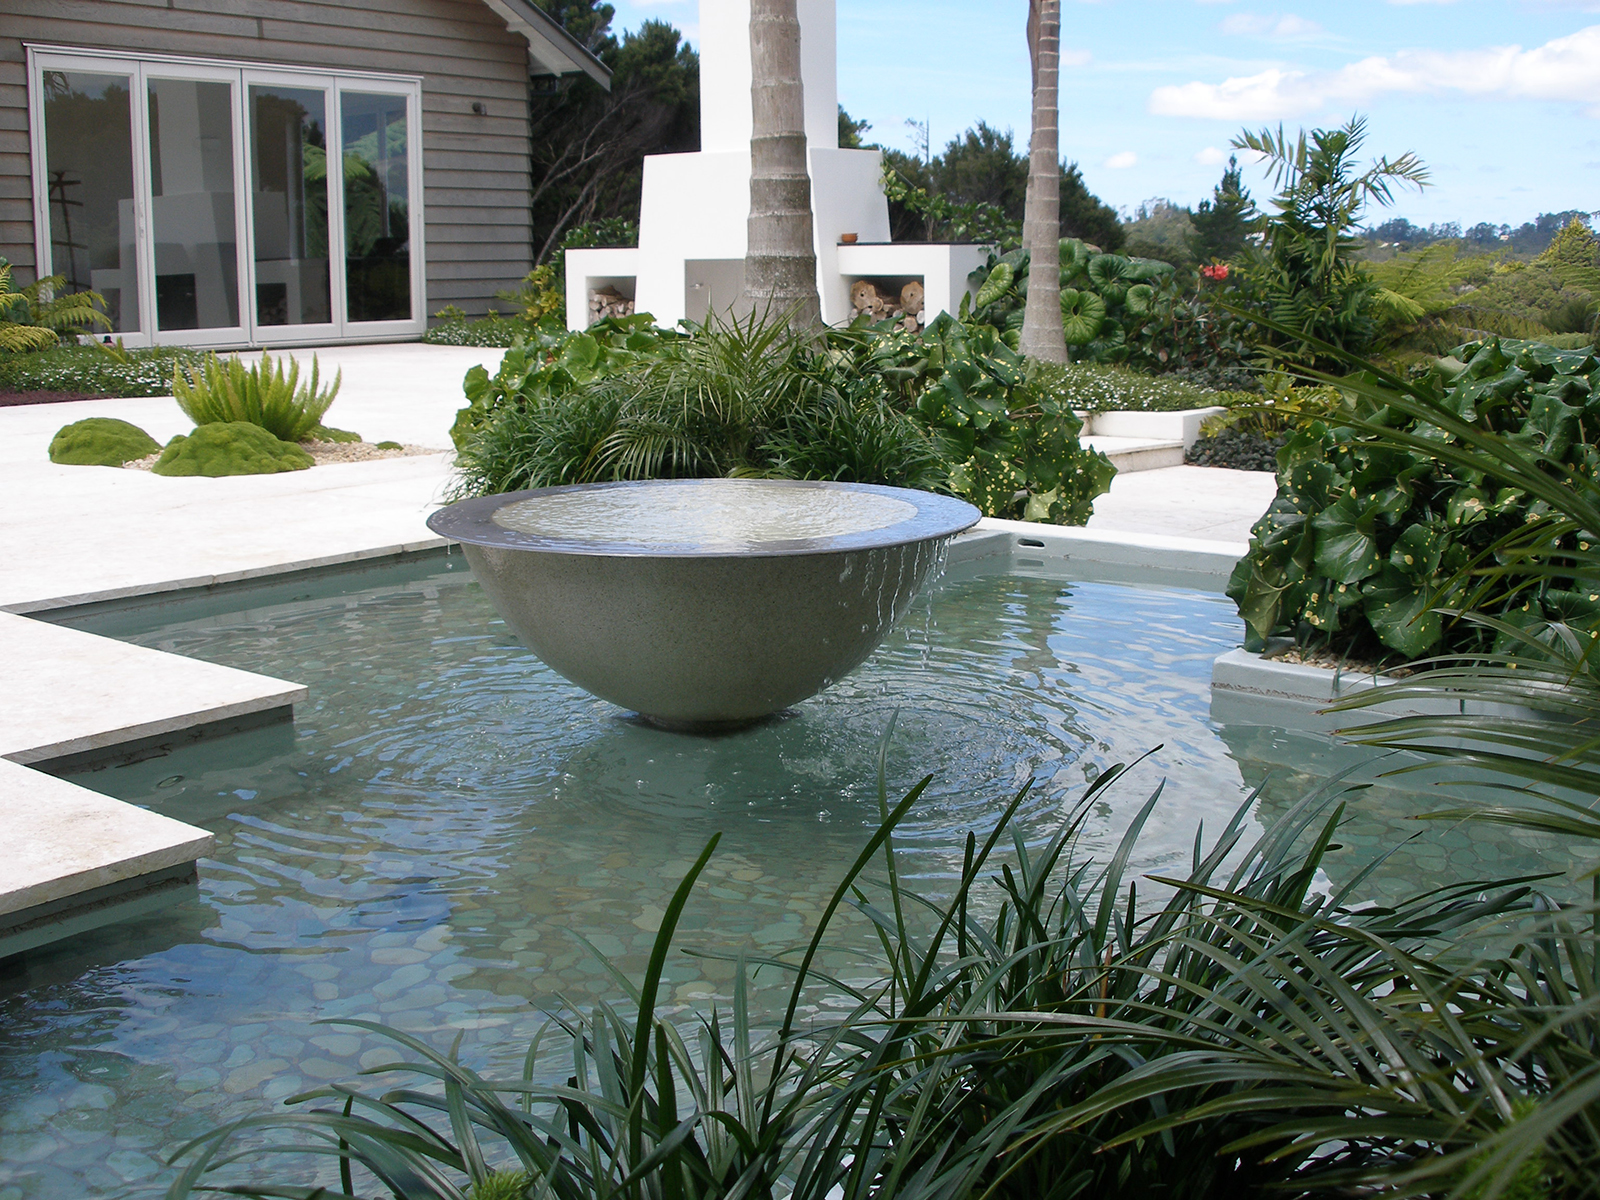 Water feature and garden design by Hawthorn Landscape Architects